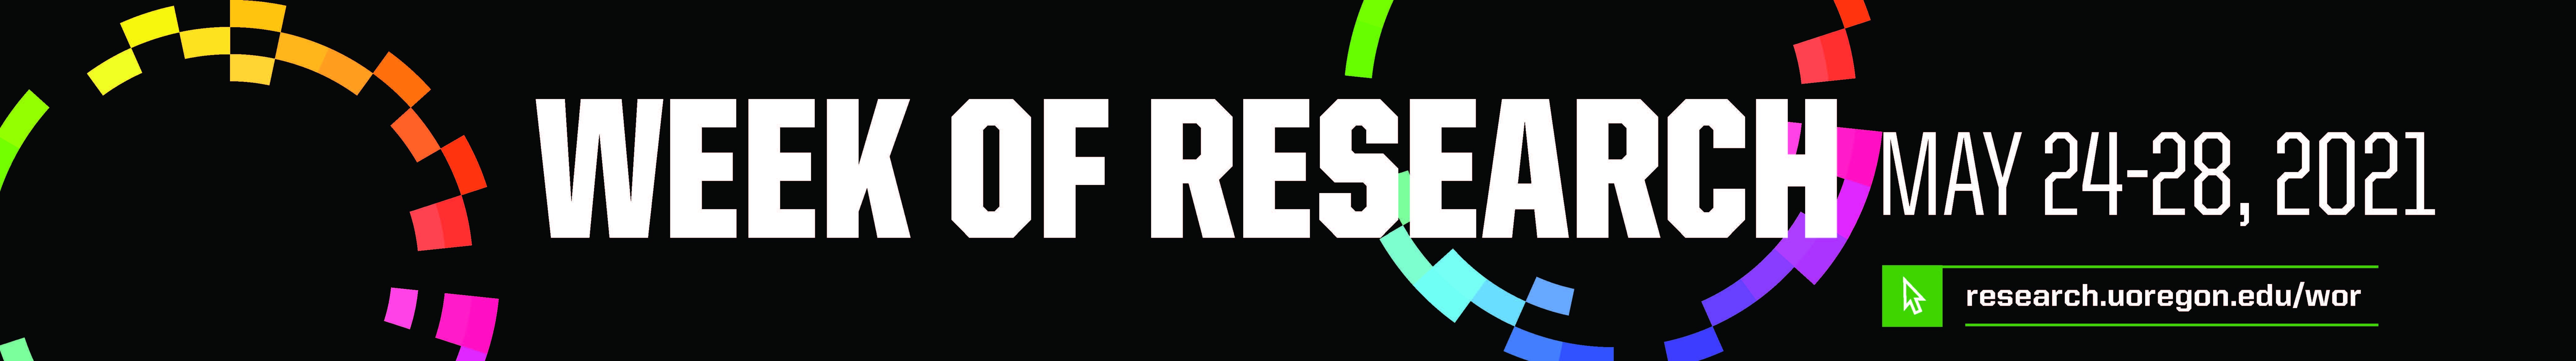 Week of Research May 24 to 28, 2021. Visit research.uoregon/wor.